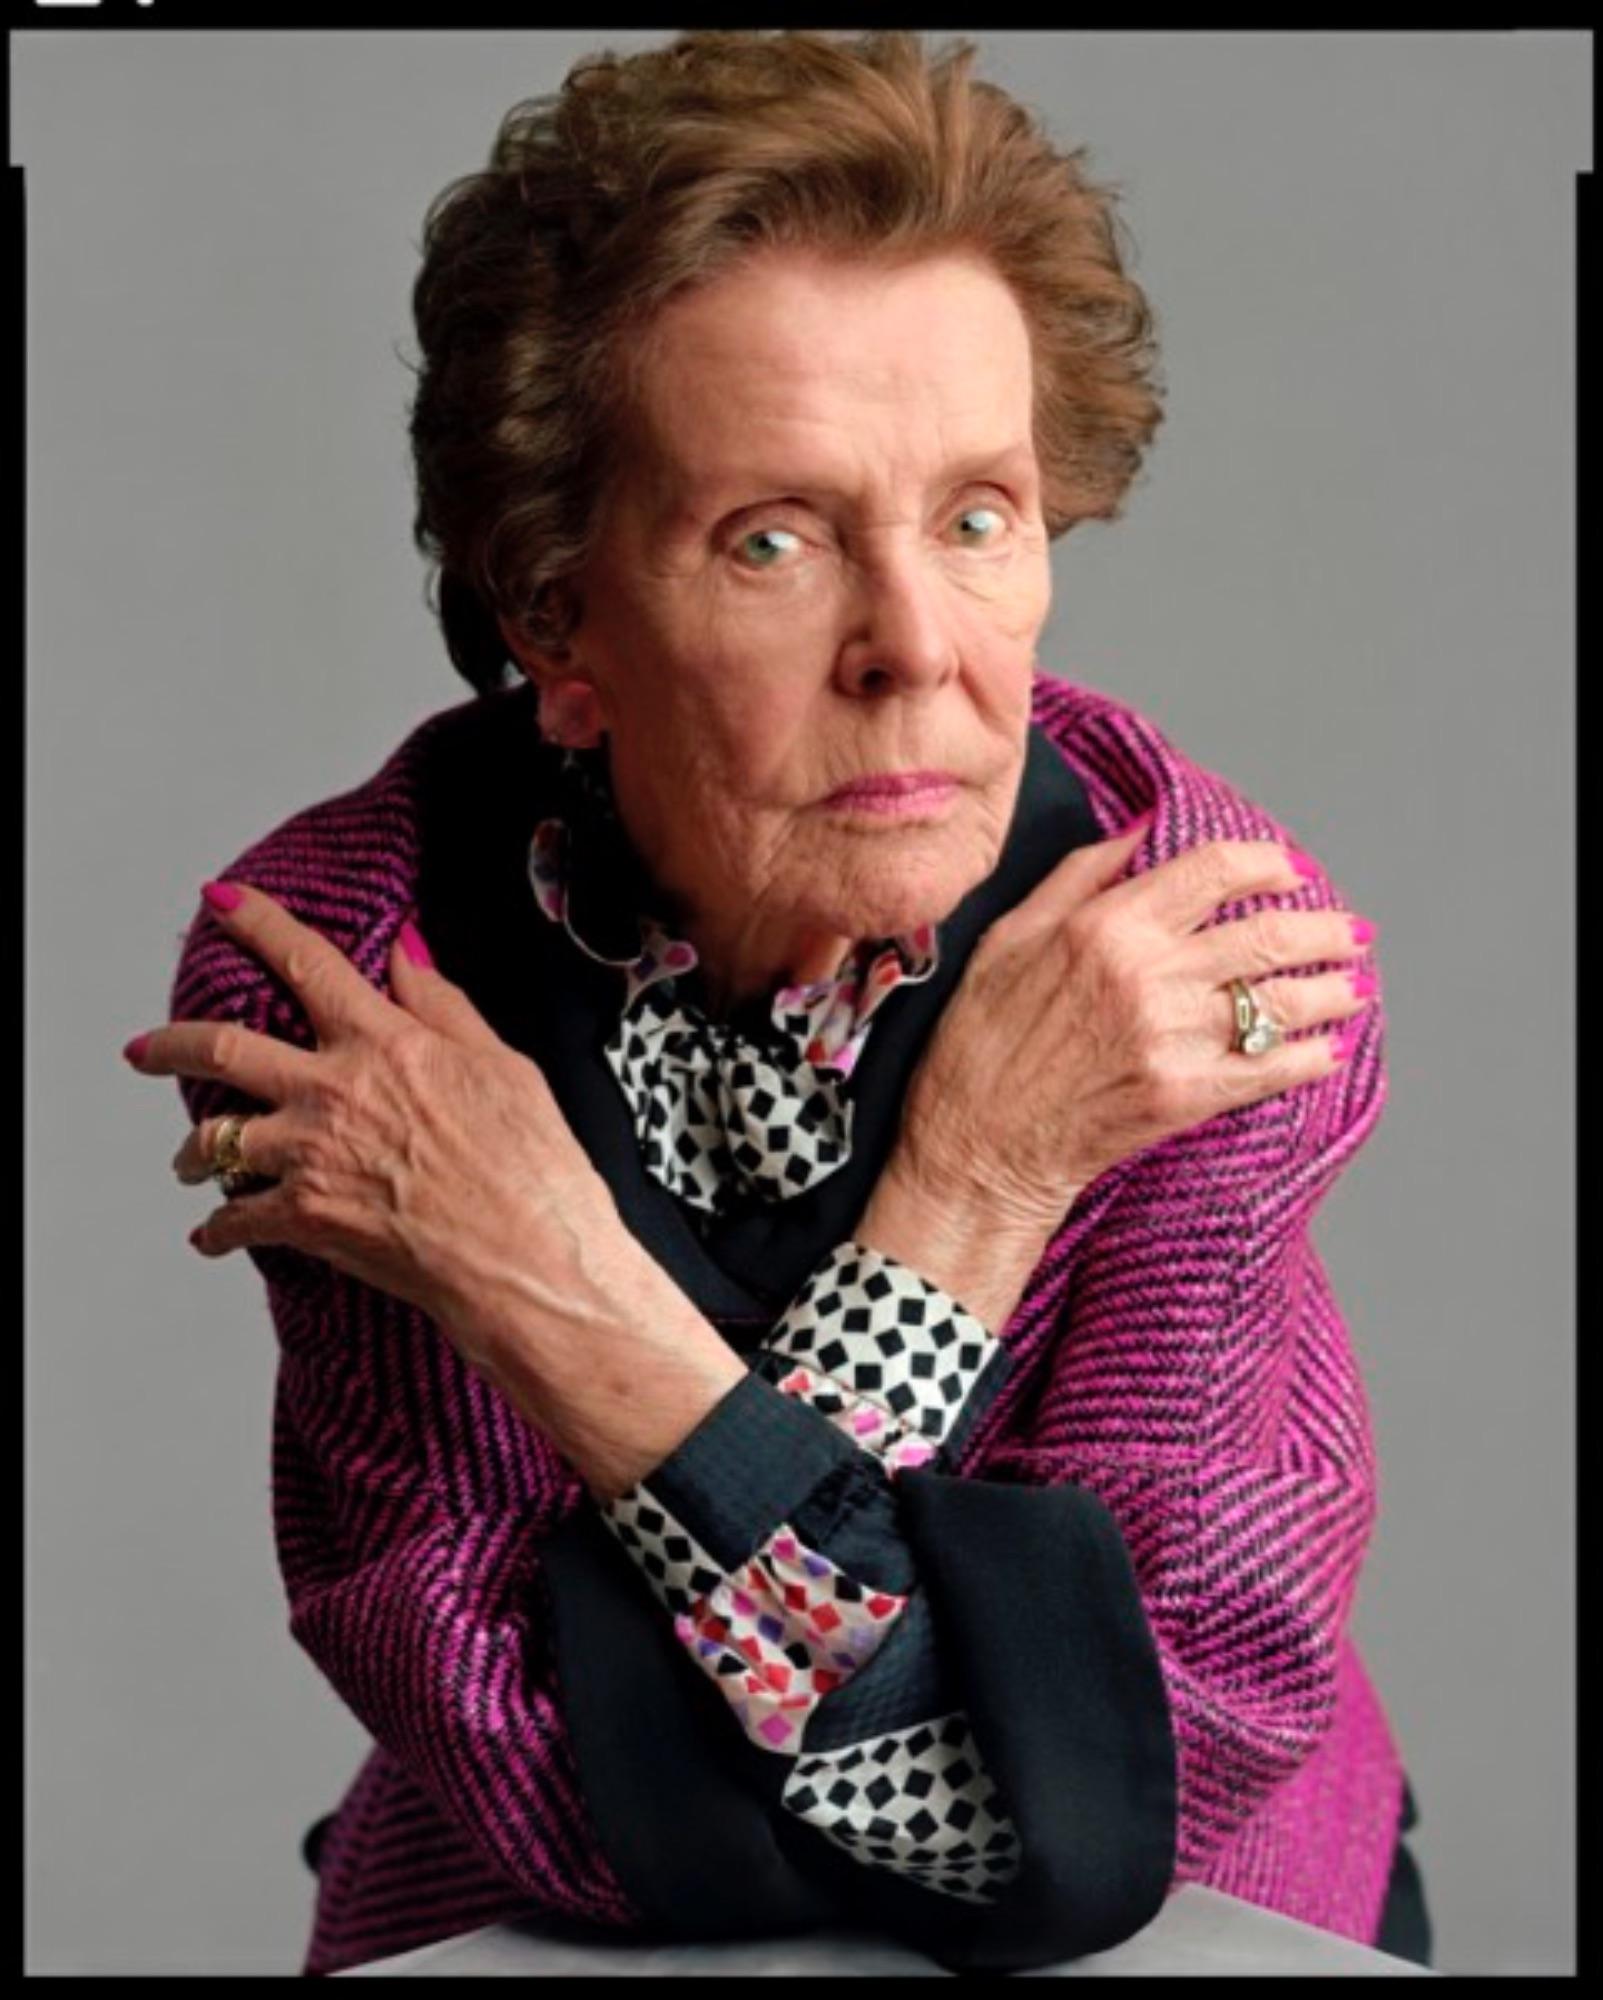 Artist: Timothy Greenfield-Sanders (1952)
Title: Eileen Ford 2011
Year: 2011
Medium: Archival Pigment Print
Edition: 3, plus proofs
Size: 14 x 11 inches
Condition: Good
Inscription: Signed, dated, titled by the artist.
Notes: Since this item will be